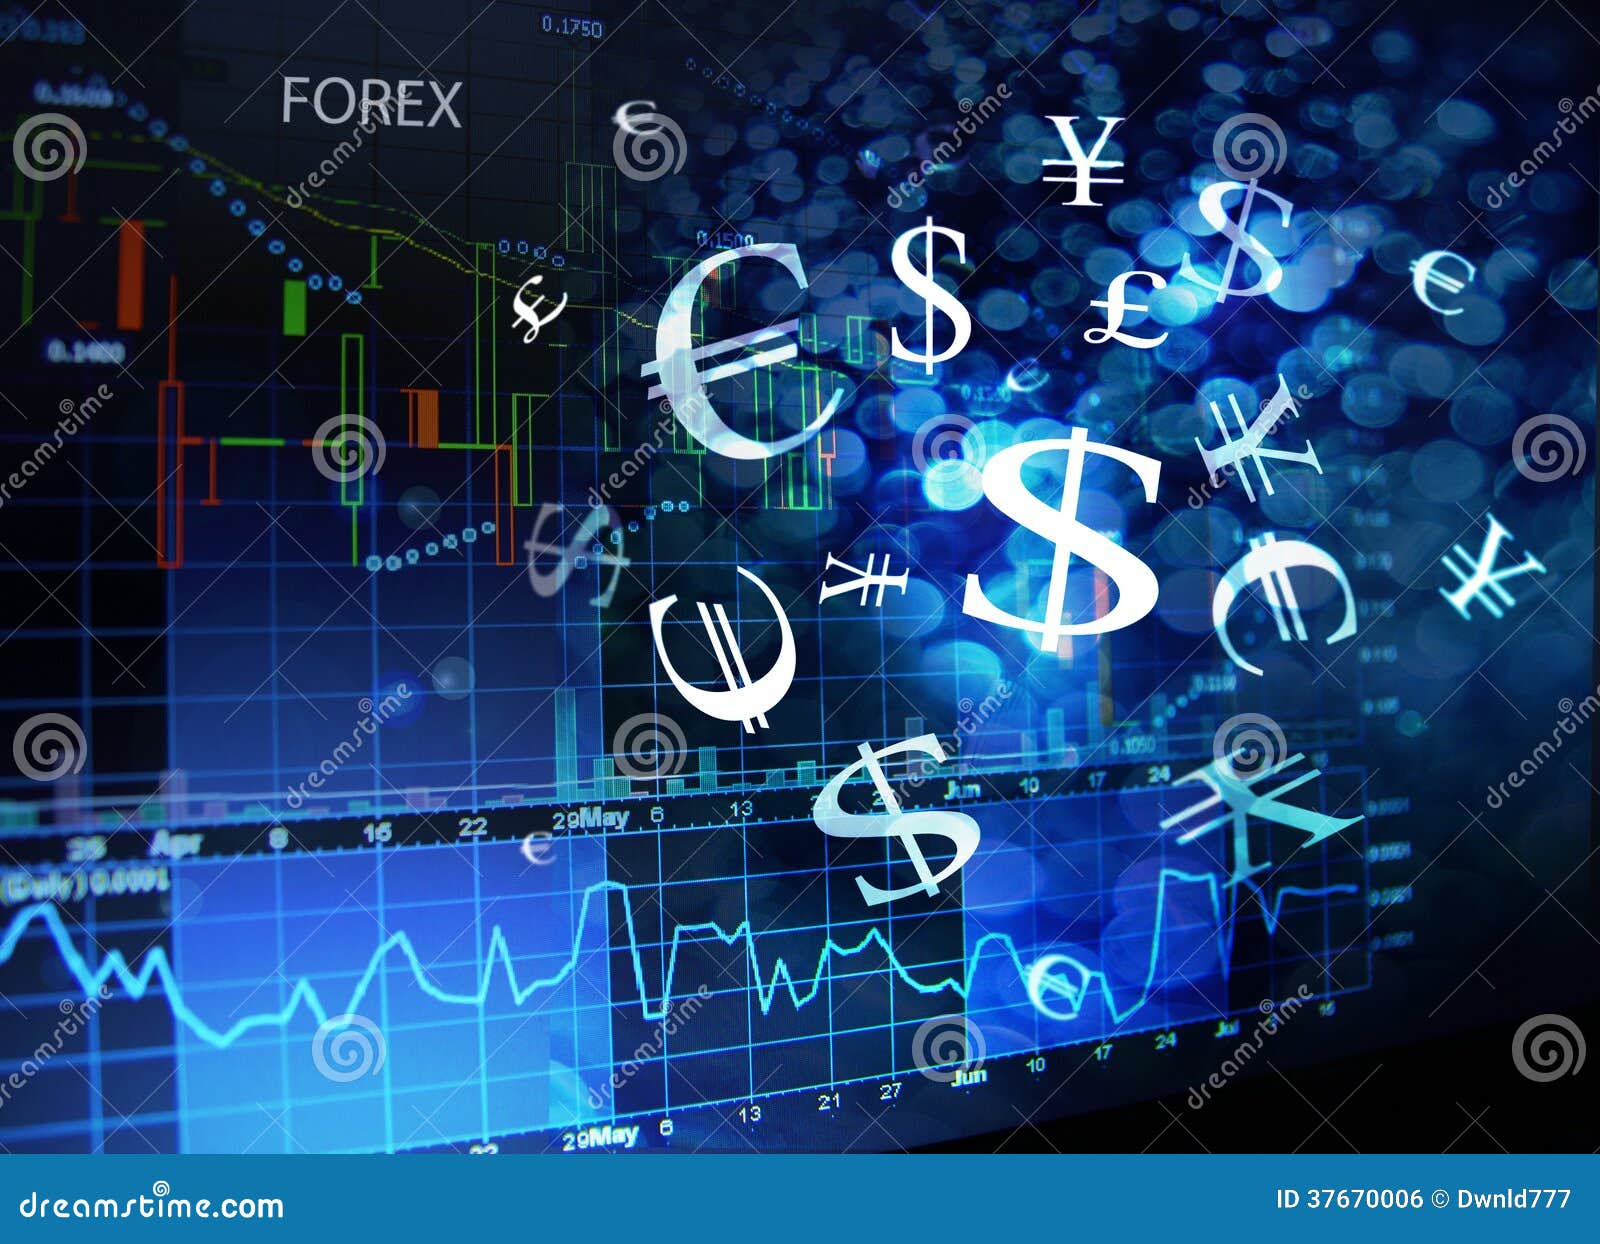 Forex currency codes